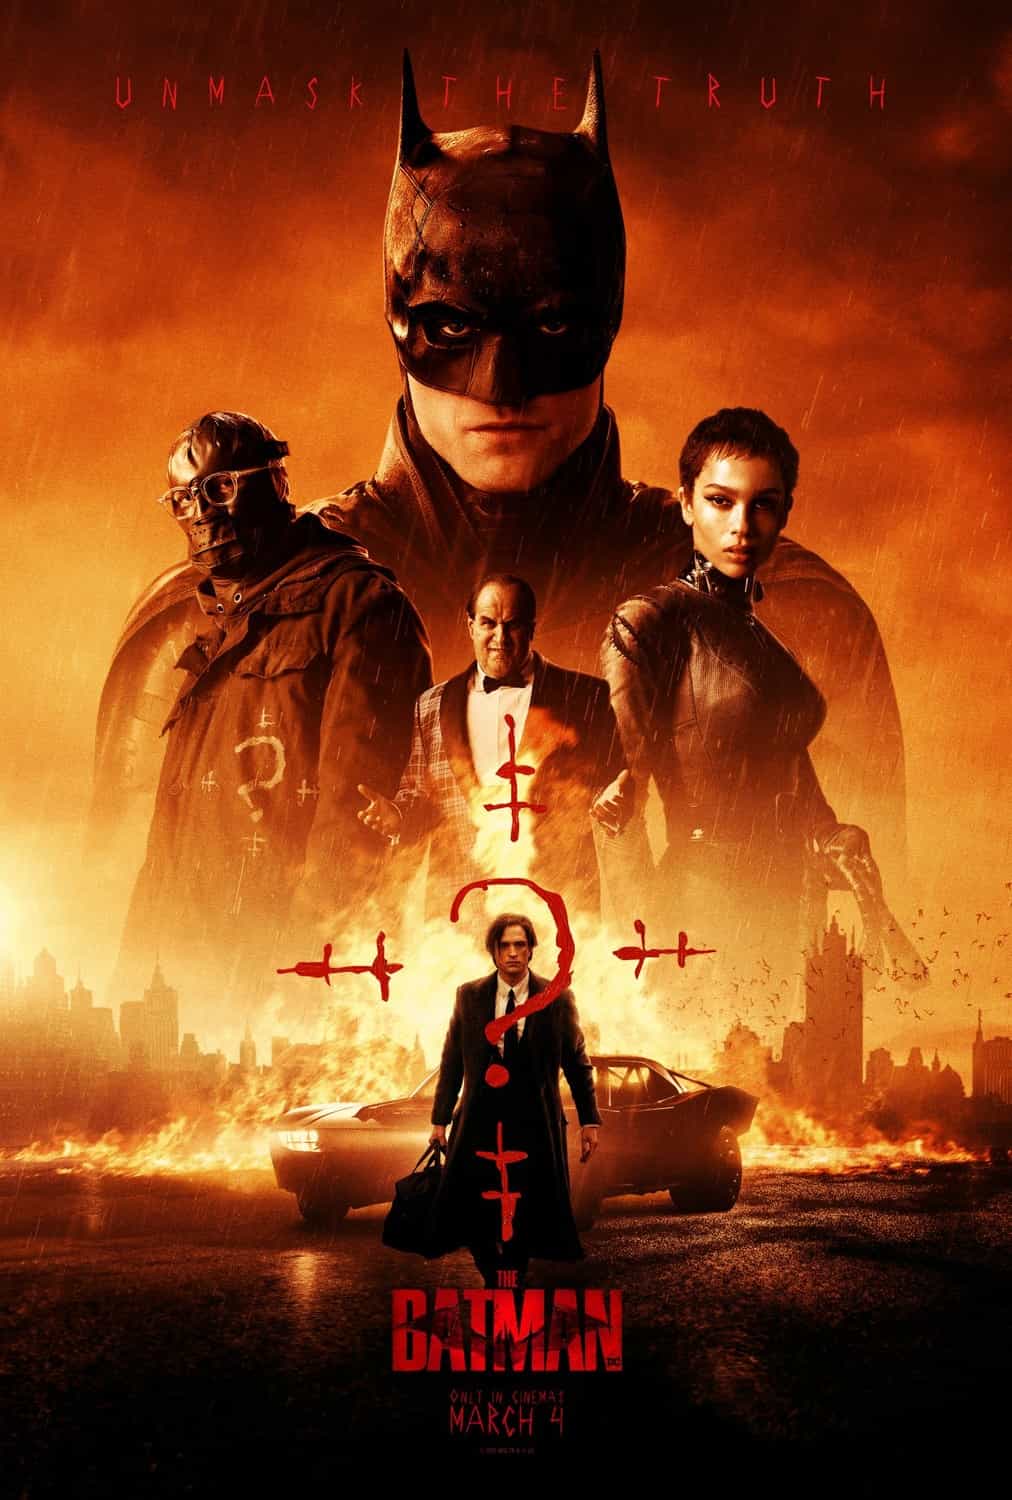 Global Box Office Figures 4th - 6th March 2022: The Batman dominates the global box office on its debut weekend of release #boxoffice